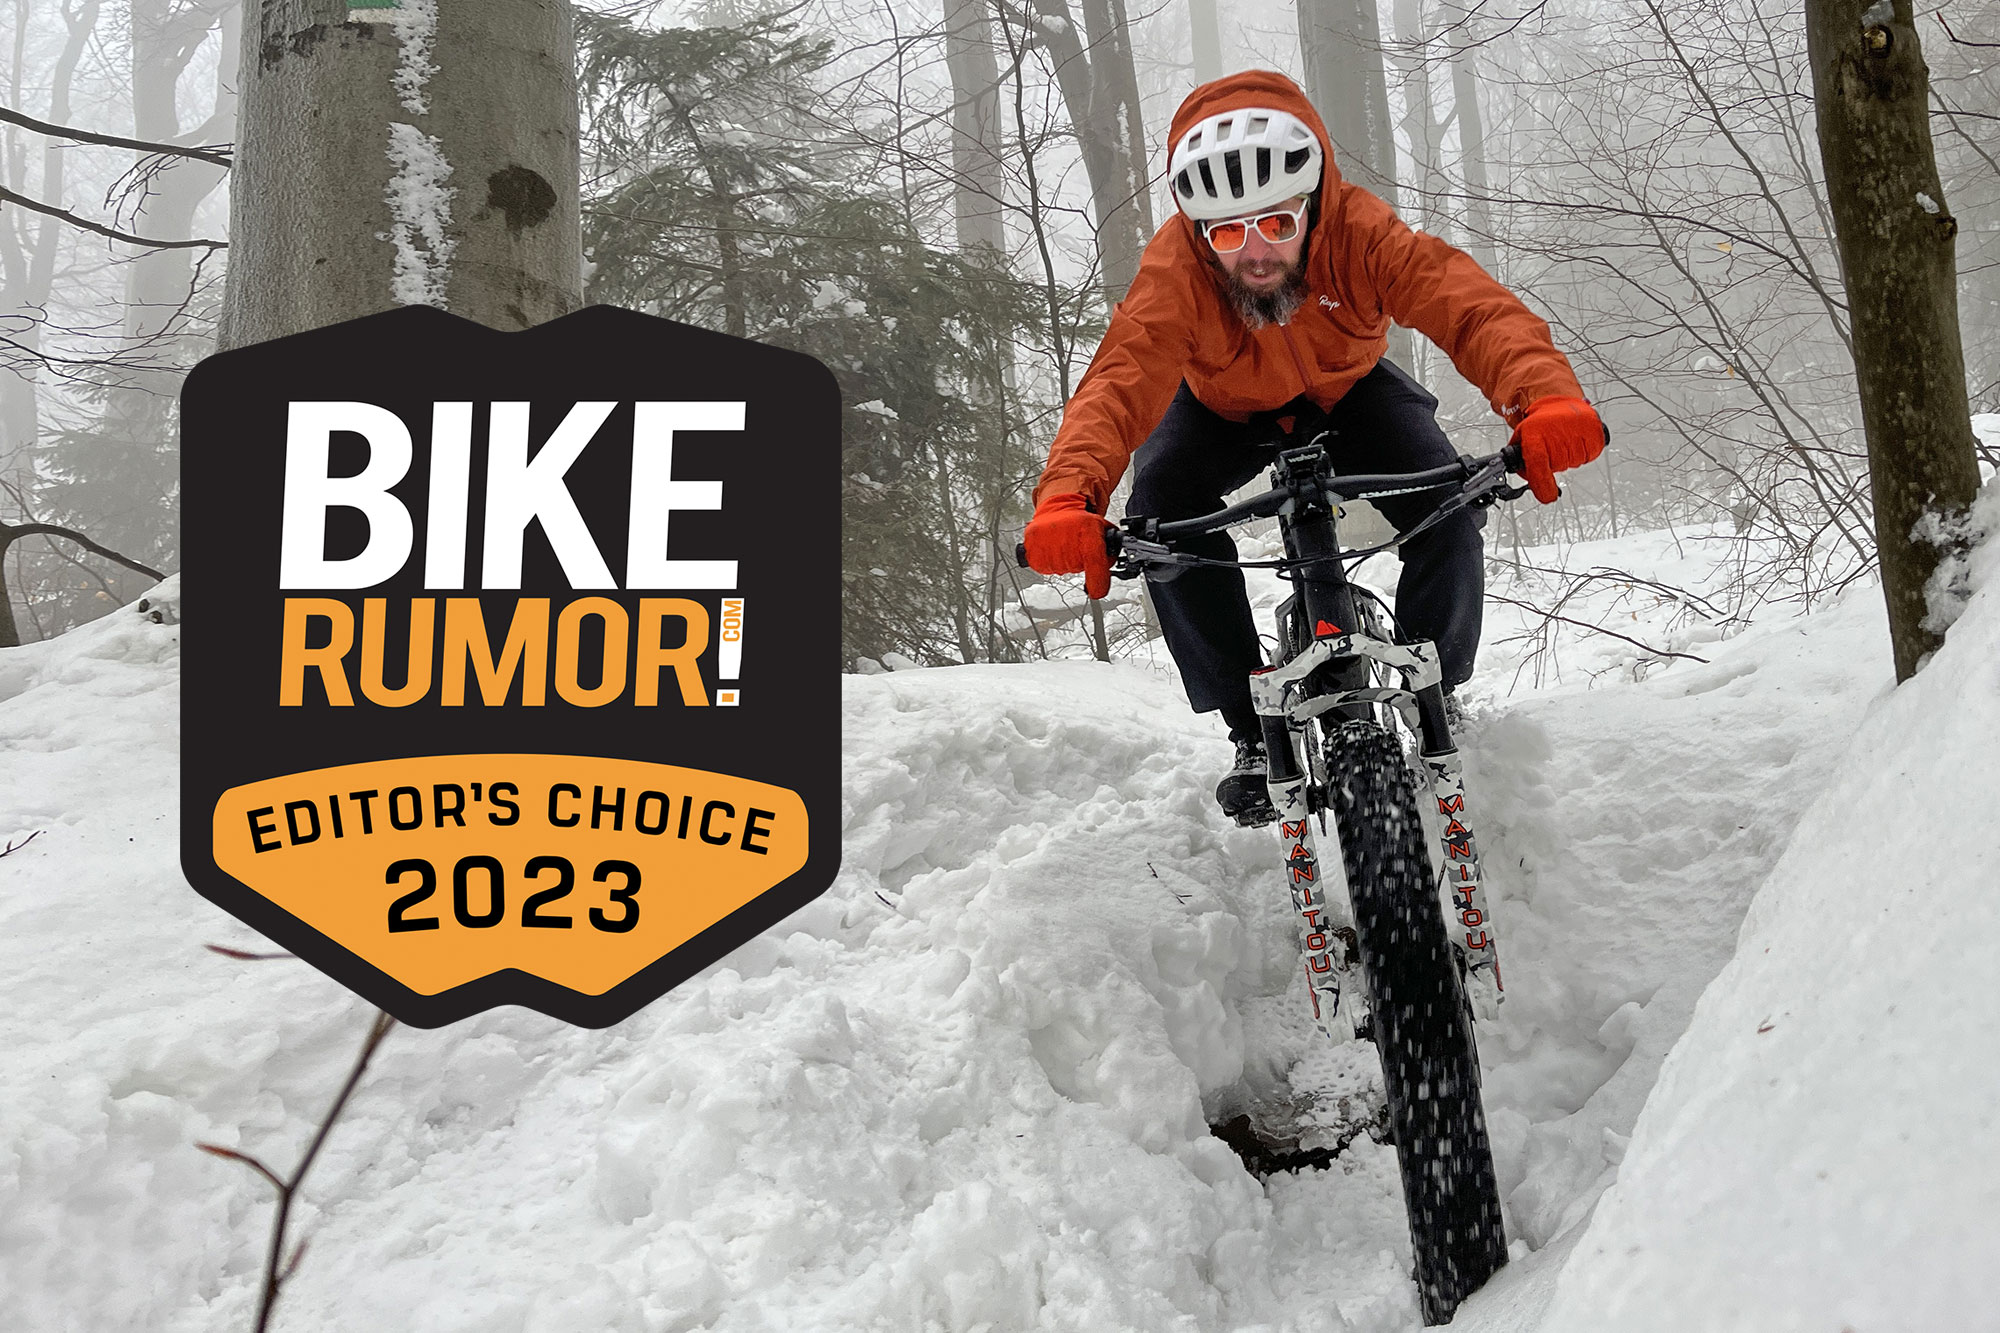 Bikerumor Editor's Choice 2023 - Frazelle's Fun Faves for the Year